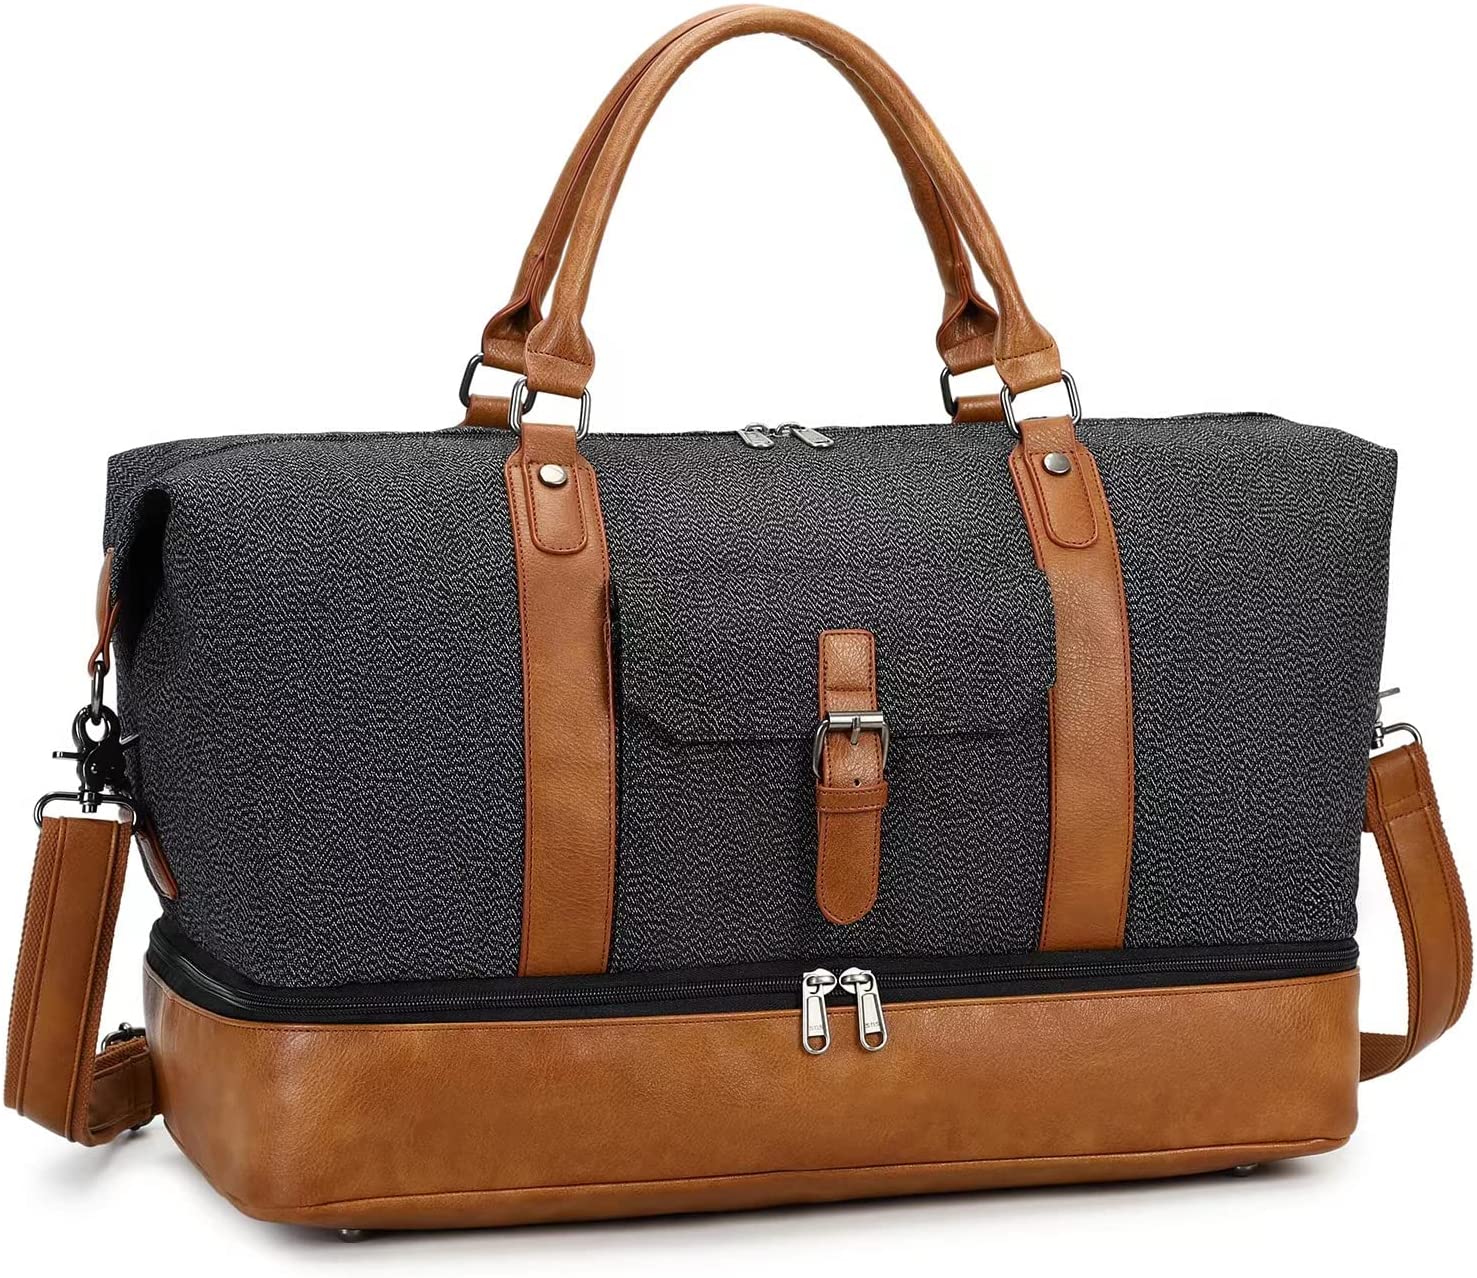 Canvas Travel Duffel Bag Overnight Weekender Bag Carry Shoulder Bag with Shoes Compartment